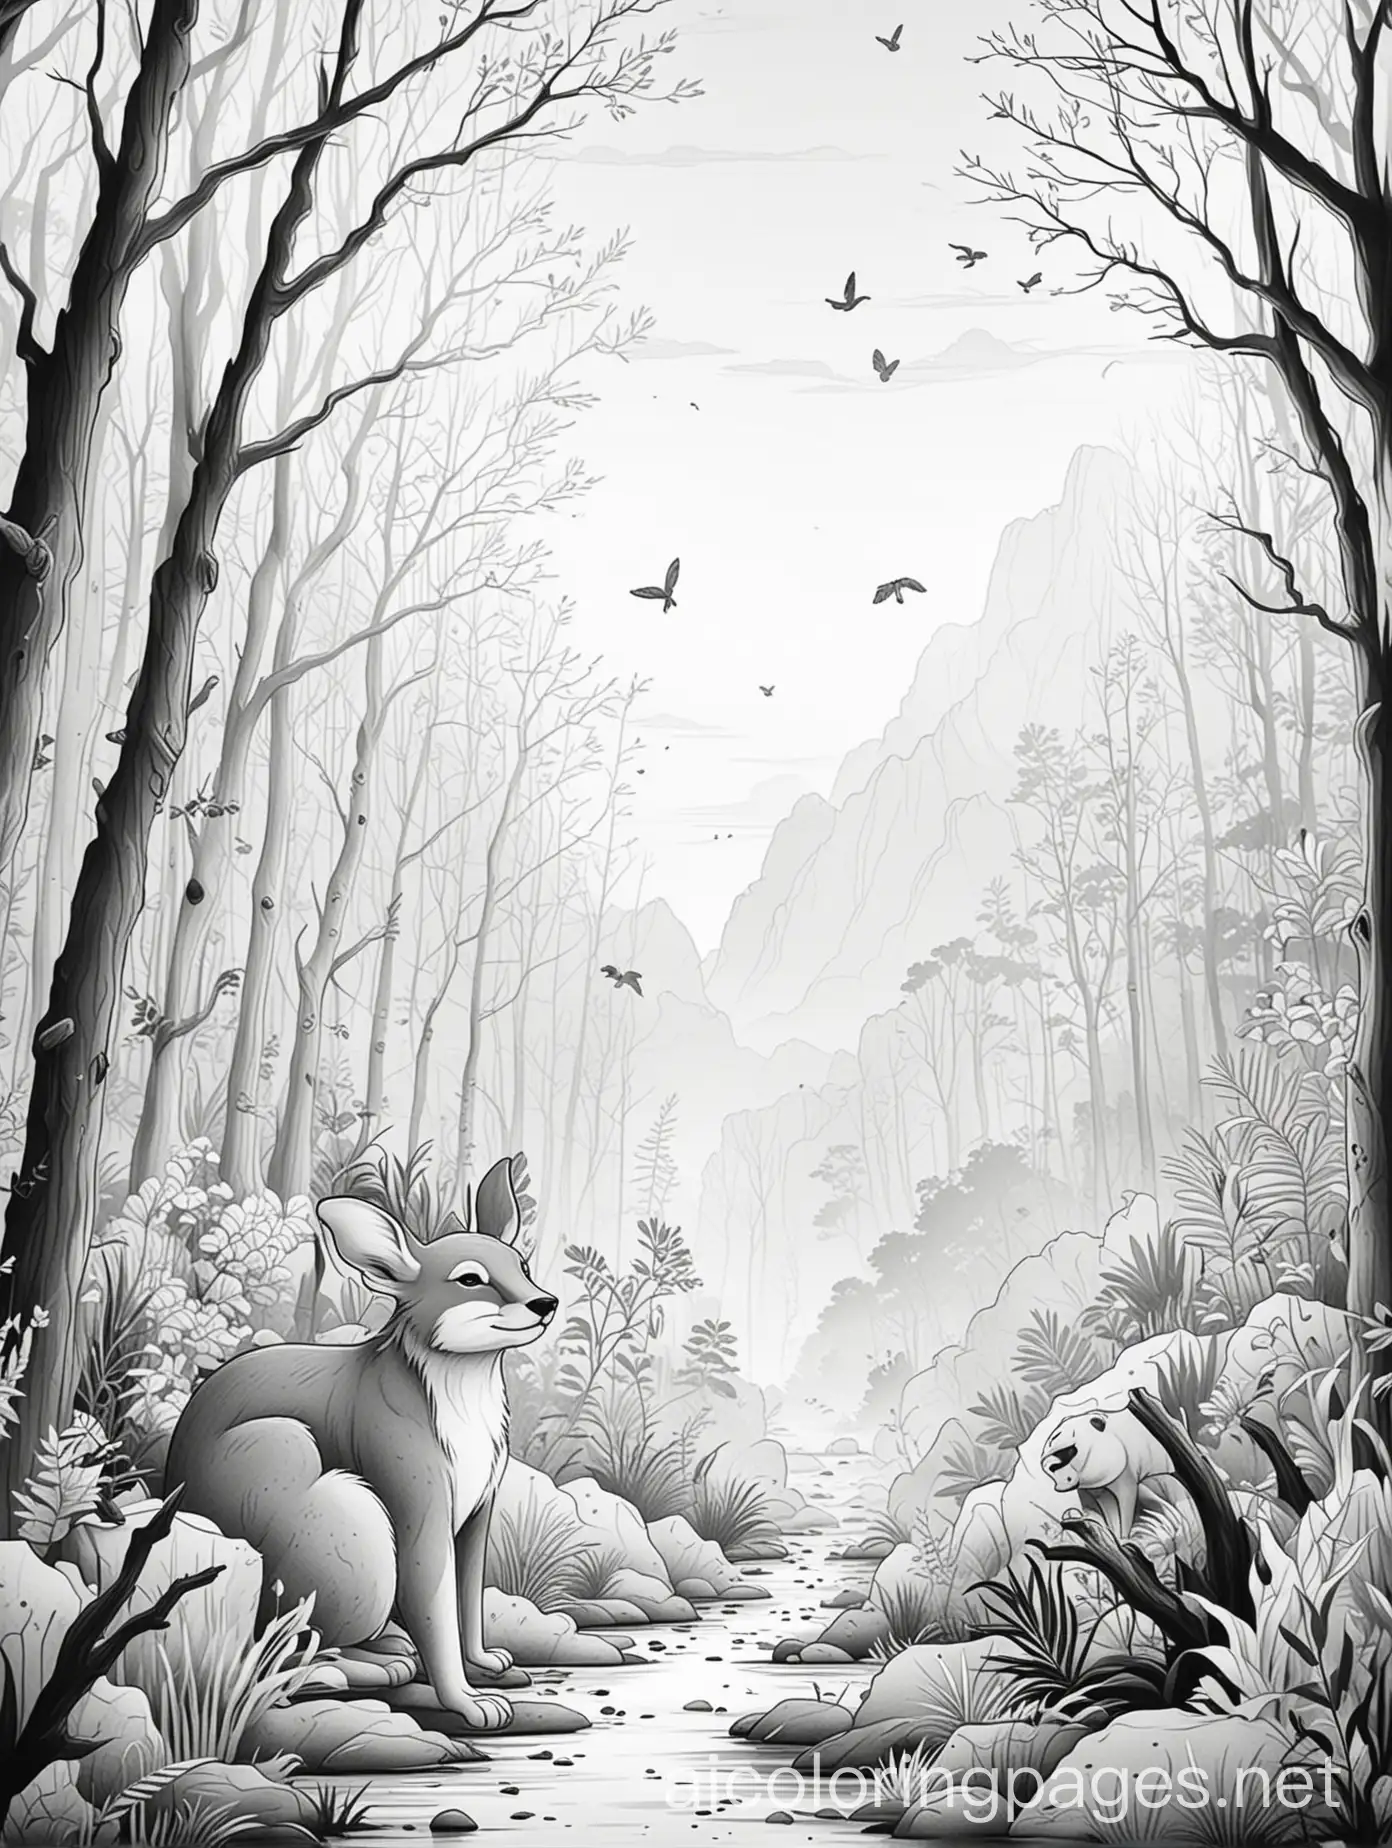 cute little cartoon style wild life, smoky and haze surroundings, Coloring Page, black and white, line art, white background, Simplicity, Ample White Space. The background of the coloring page is plain white to make it easy for young children to color within the lines. The outlines of all the subjects are easy to distinguish, making it simple for kids to color without too much difficulty